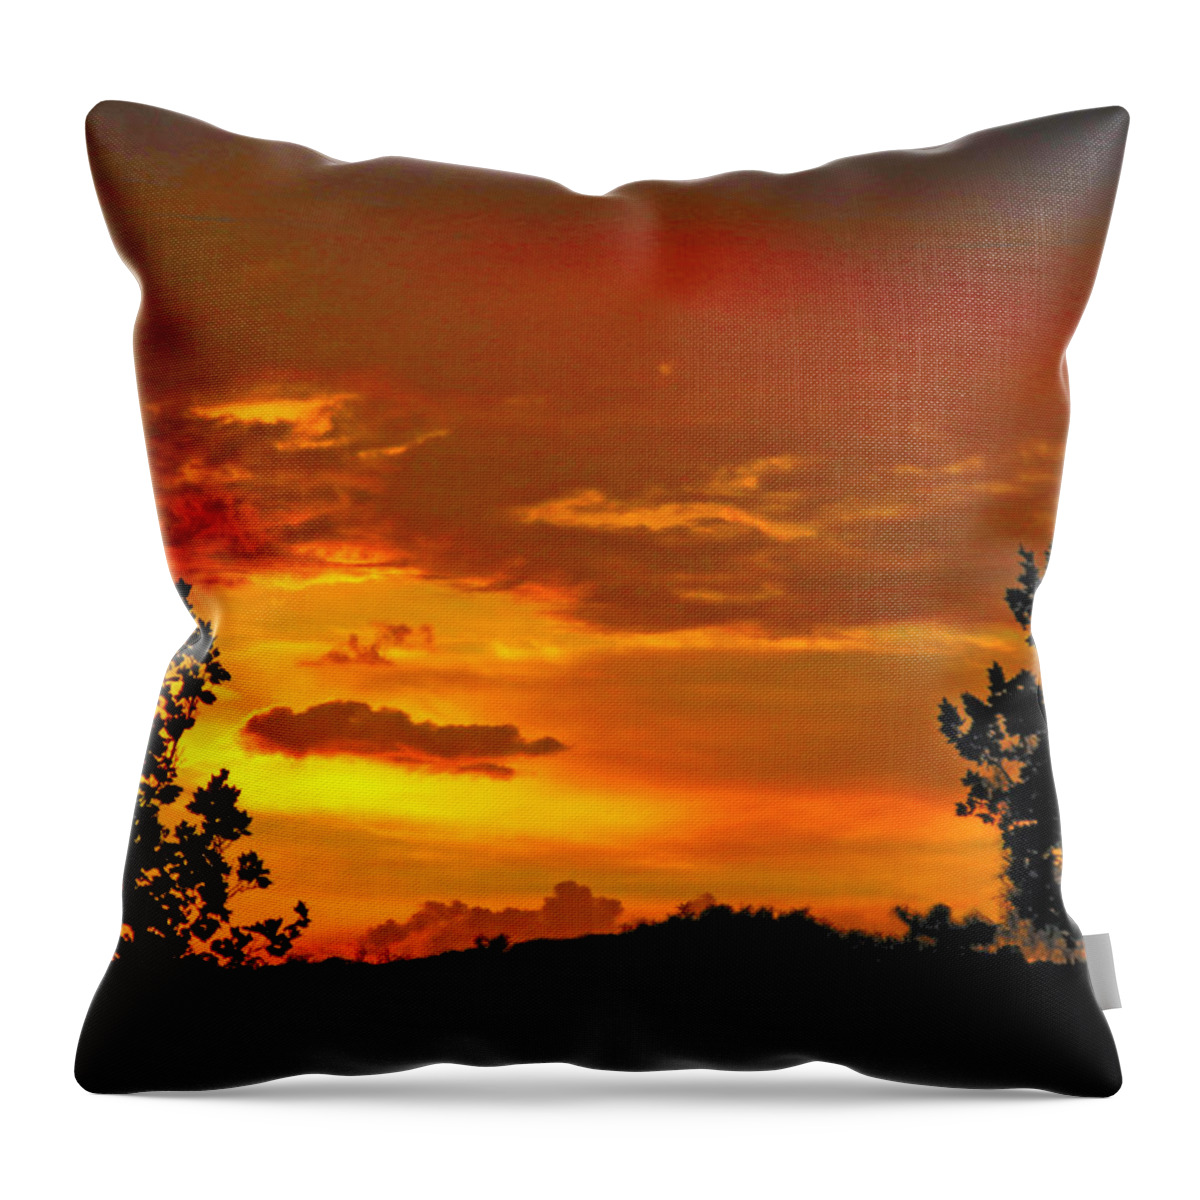 Sunrise Throw Pillow featuring the photograph Golden Dawn by Mark Blauhoefer